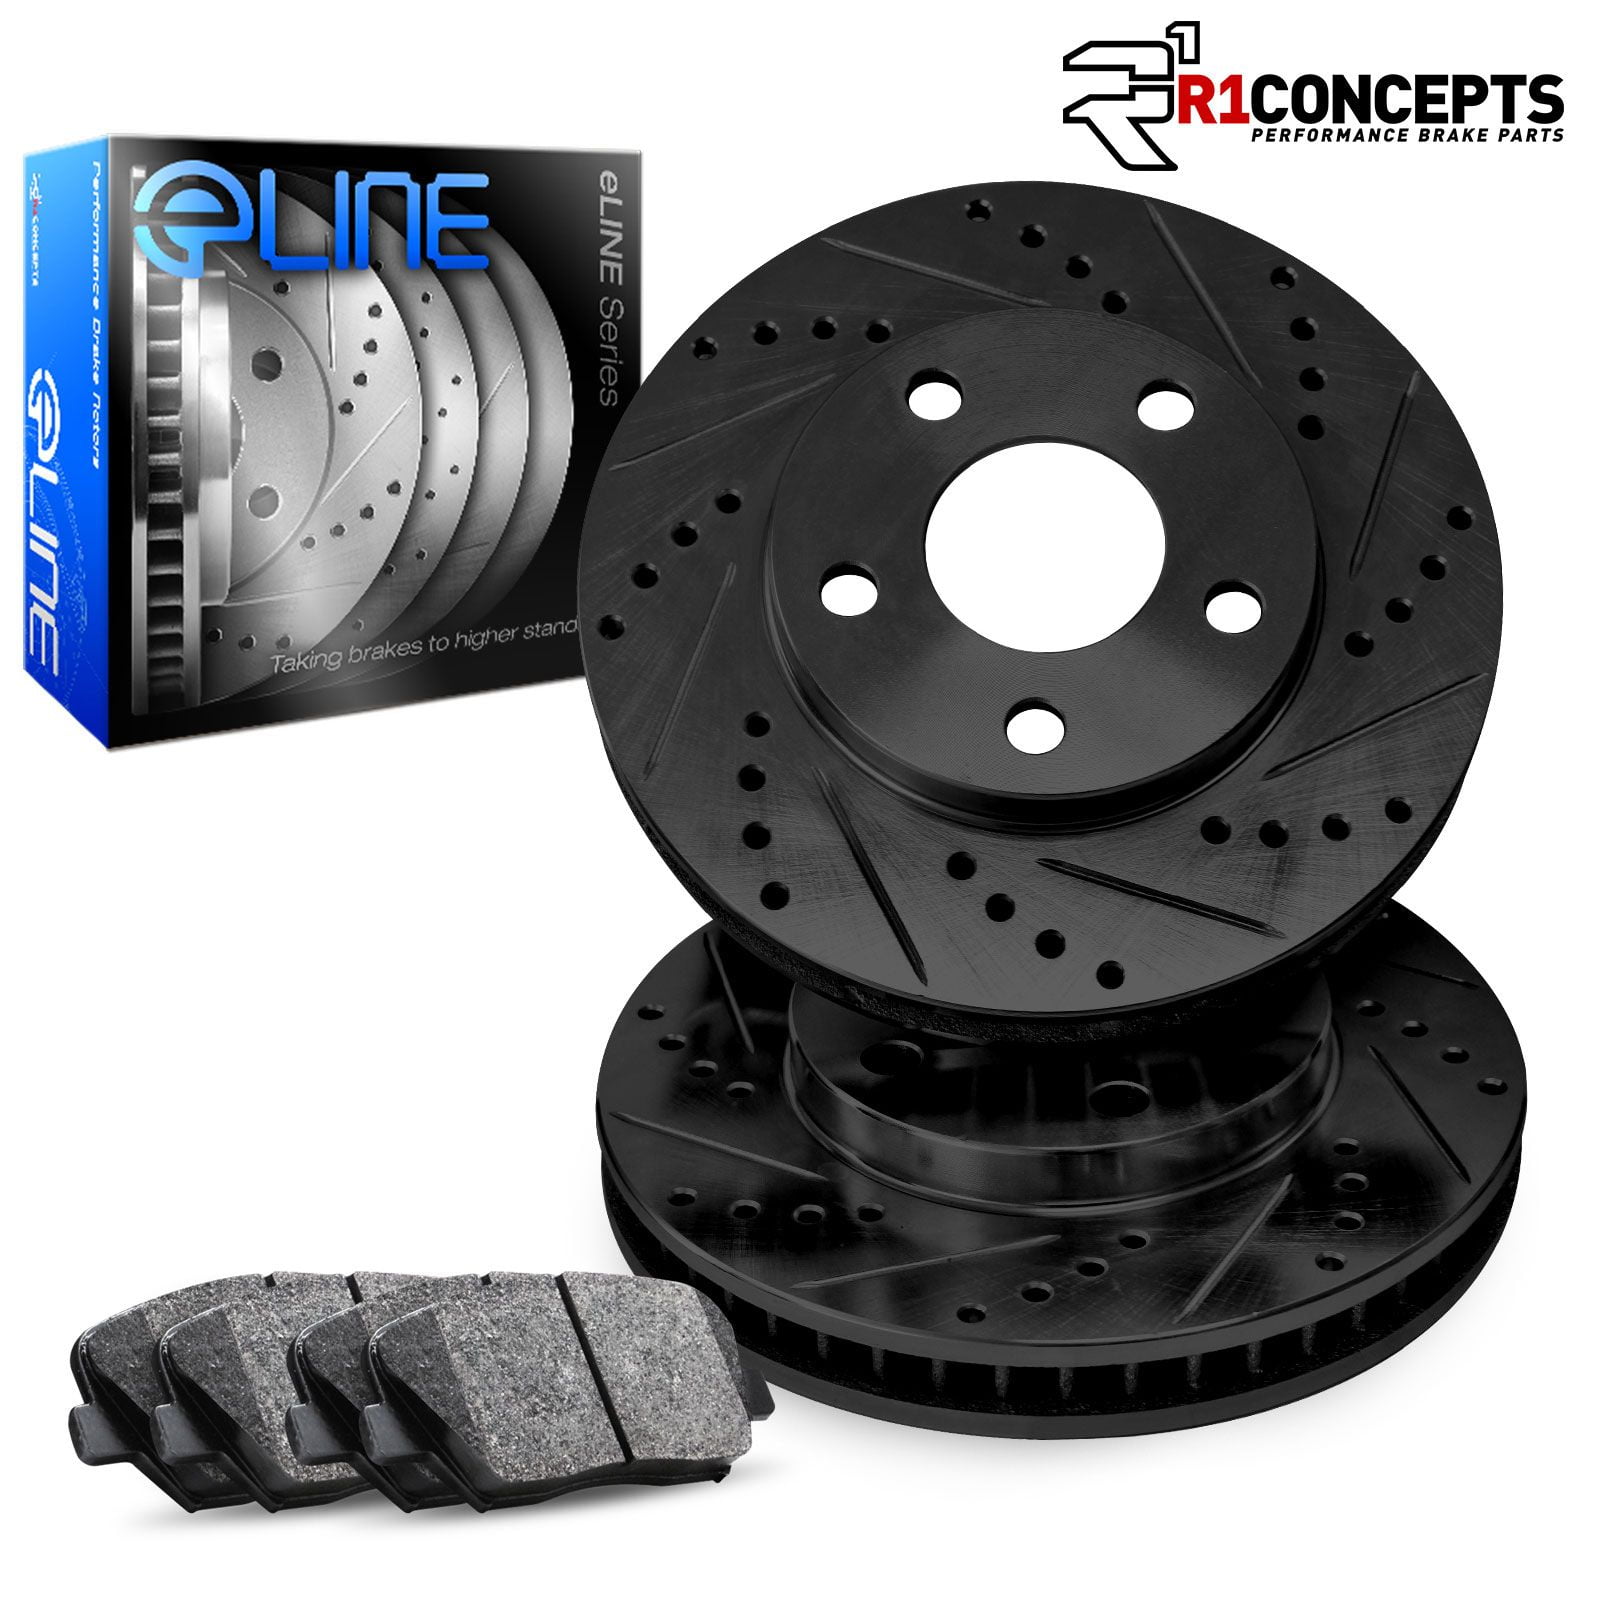 Rear Drilled and Slotted Brake Rotors for 2001 2002 Dodge Ram 2500 3500